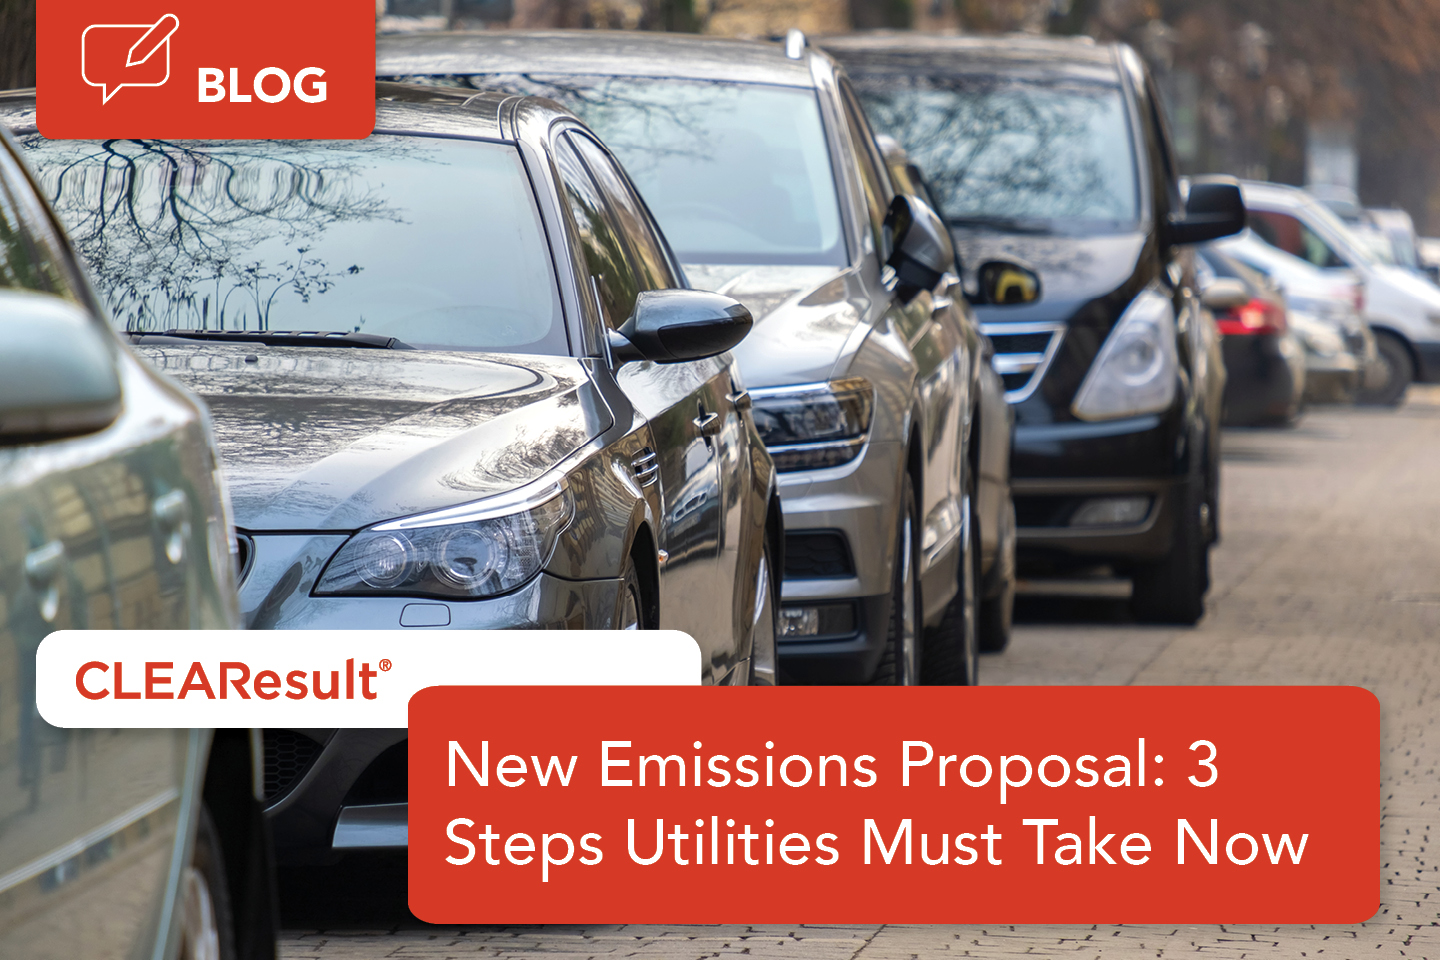 New emissions proposal: 3 steps utilities must take now